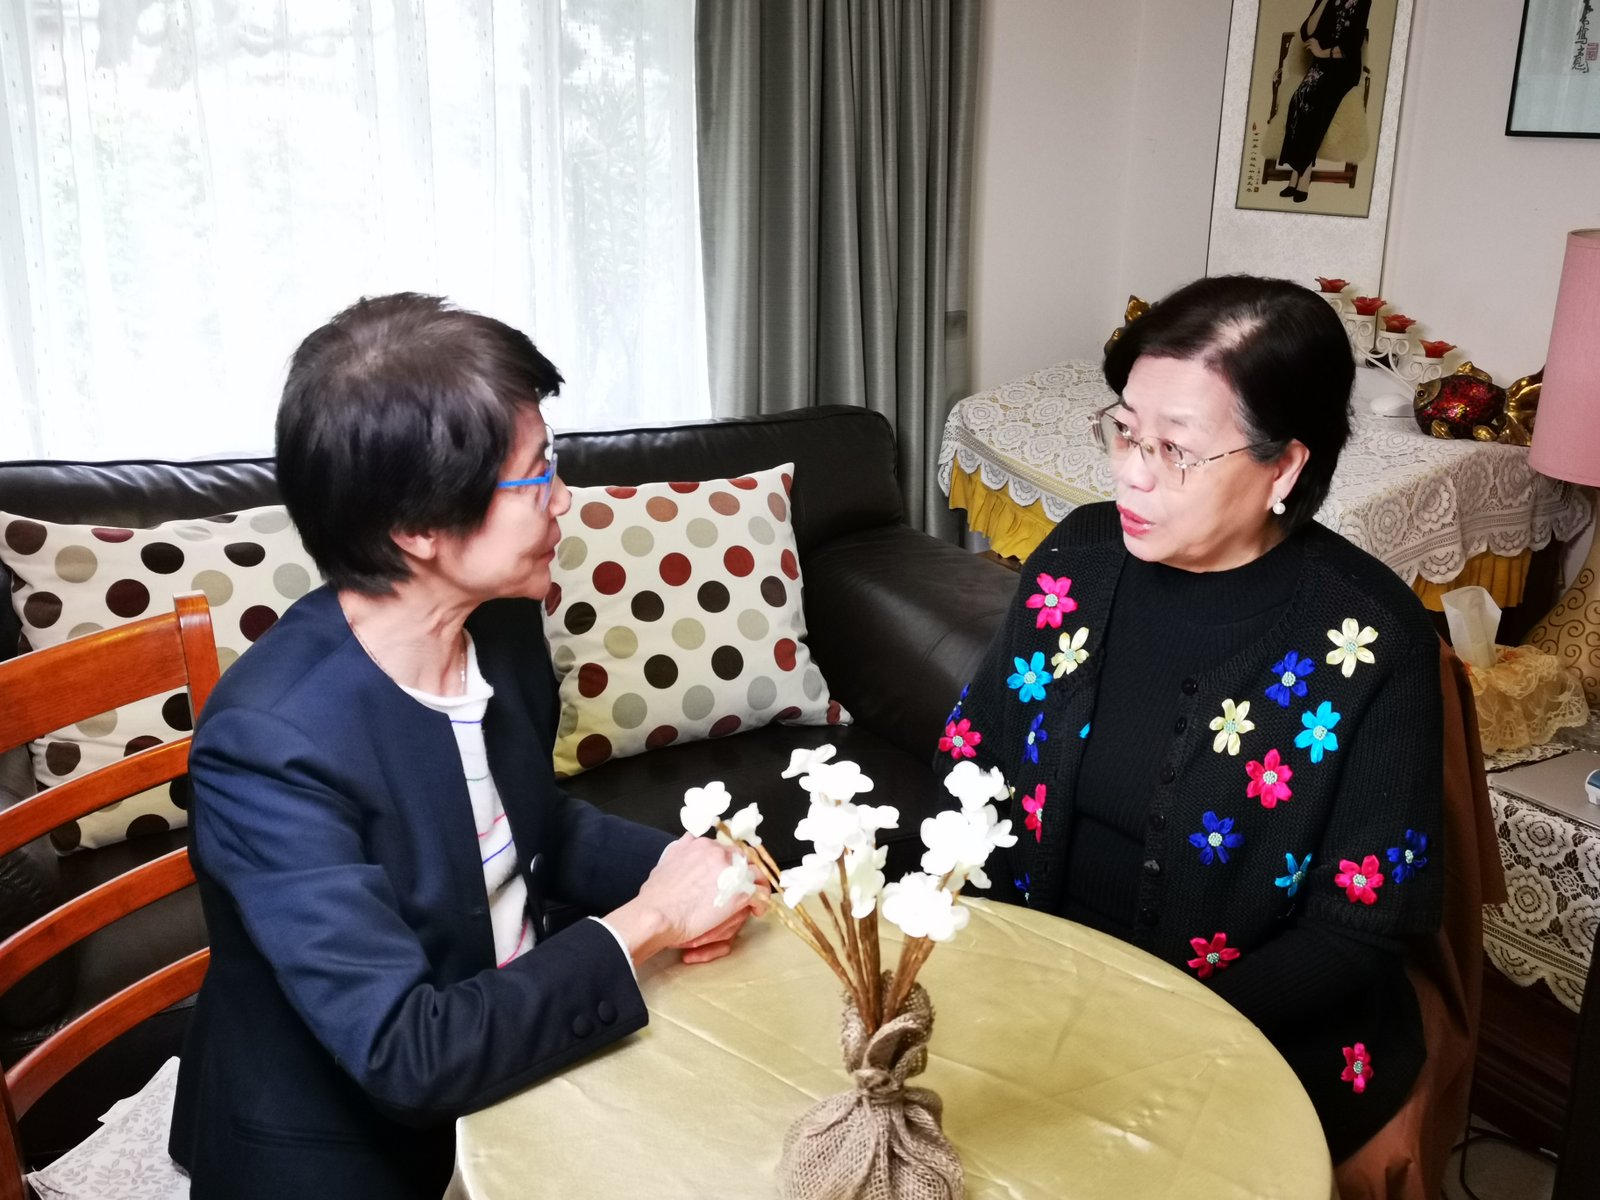 Story of Carer Ms Zhou: Chinese couple value the support of palliative care